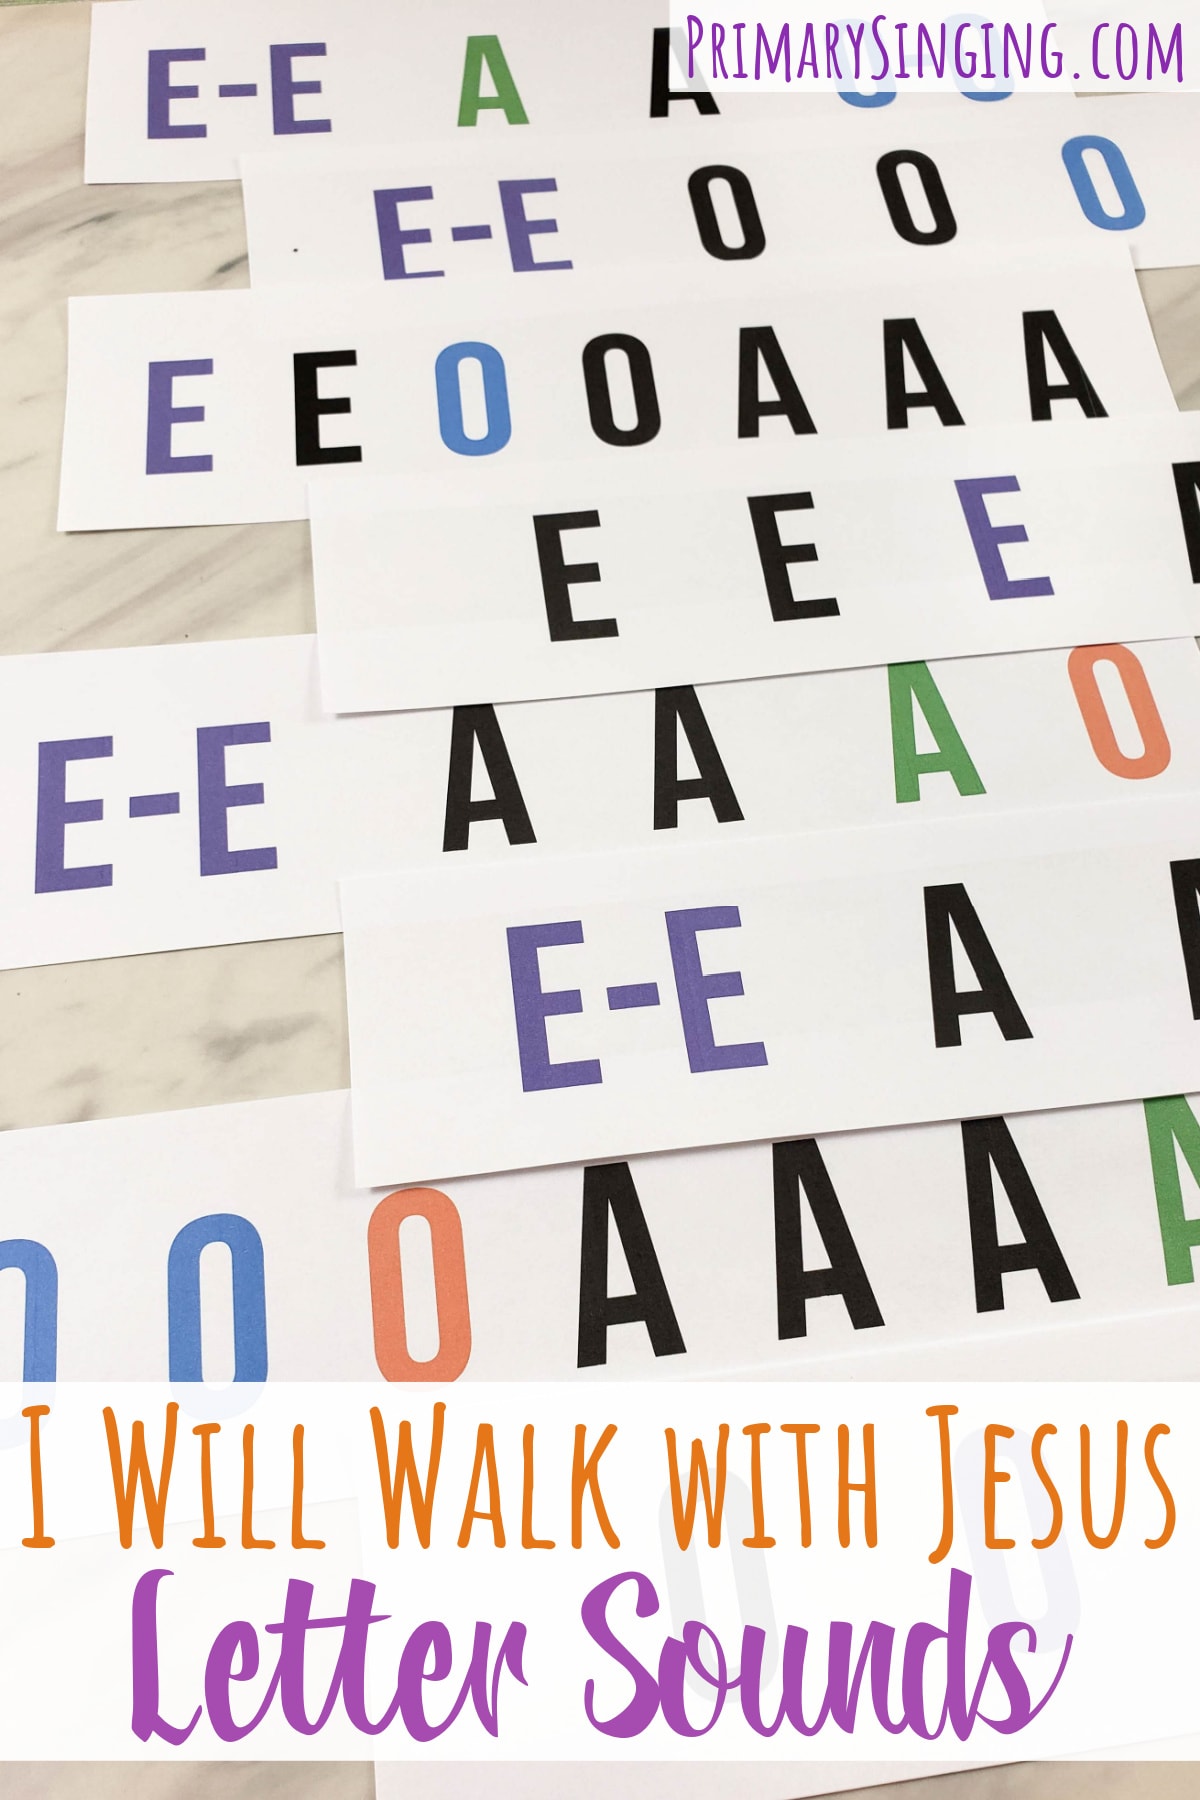 I Will Walk with Jesus Letter Sounds singing time ideas for LDS Primary music leaders with printable song helps